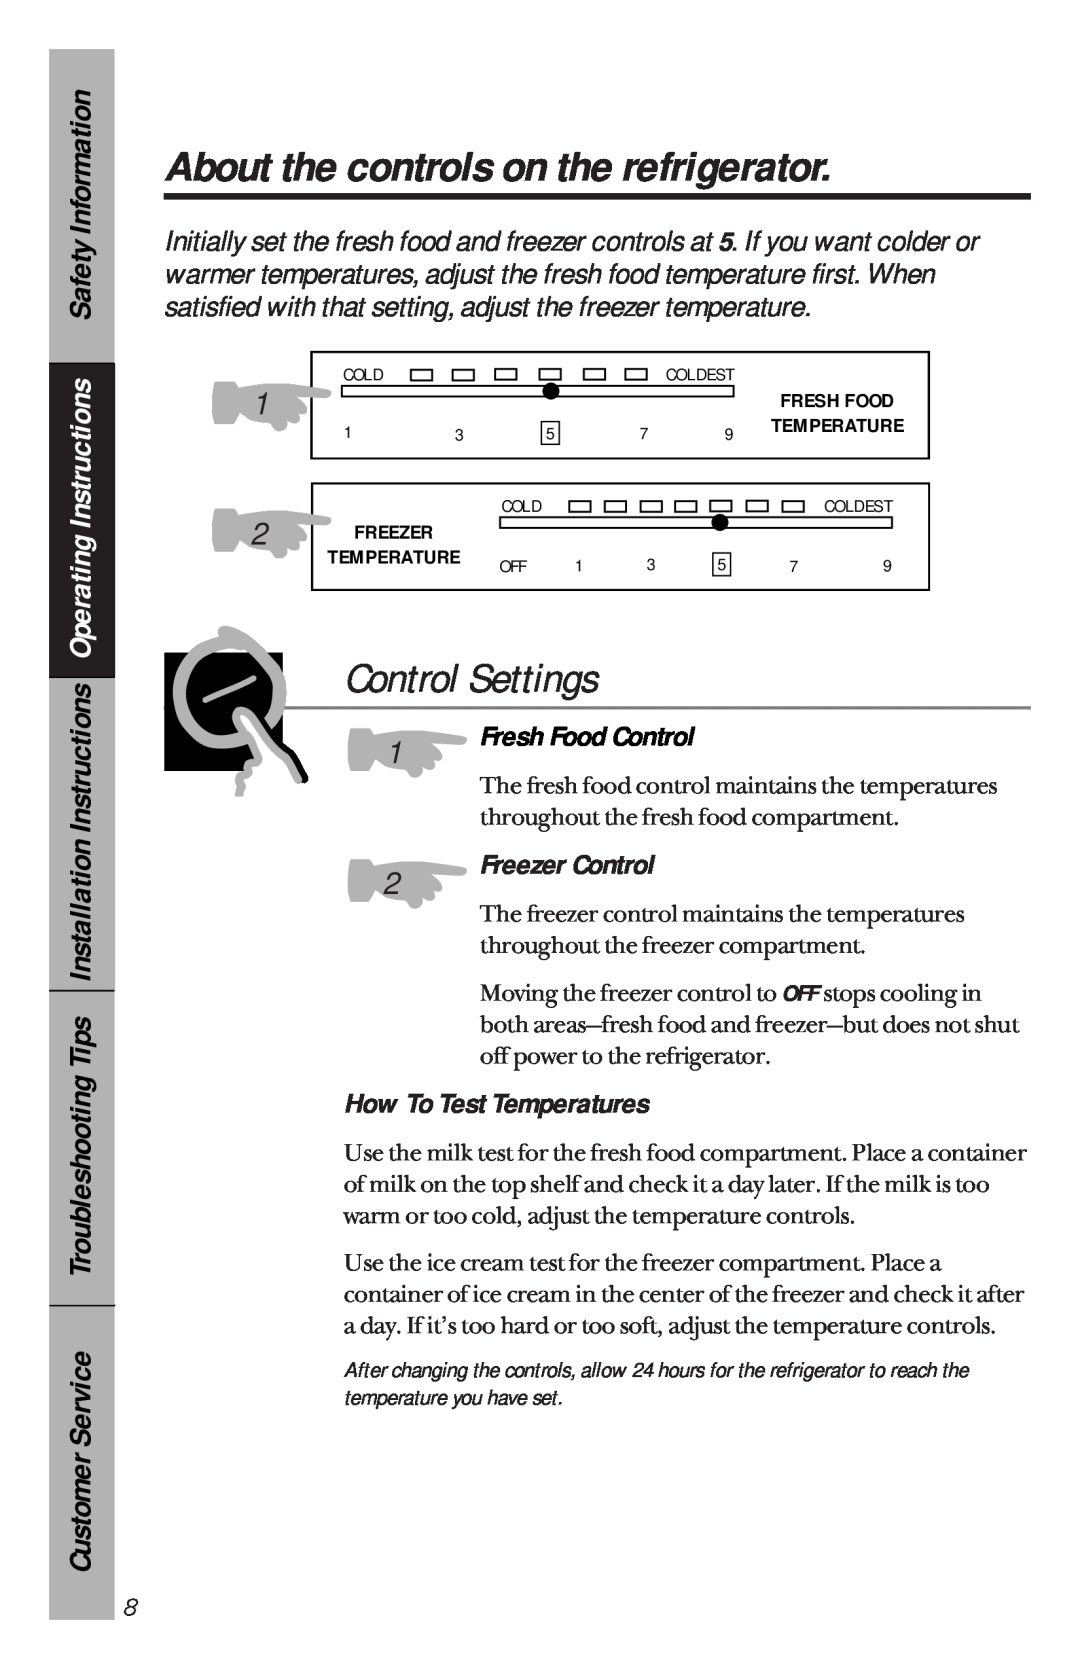 GE 162D3941P005 owner manual About the controls on the refrigerator, Control Settings, How To Test Temperatures 